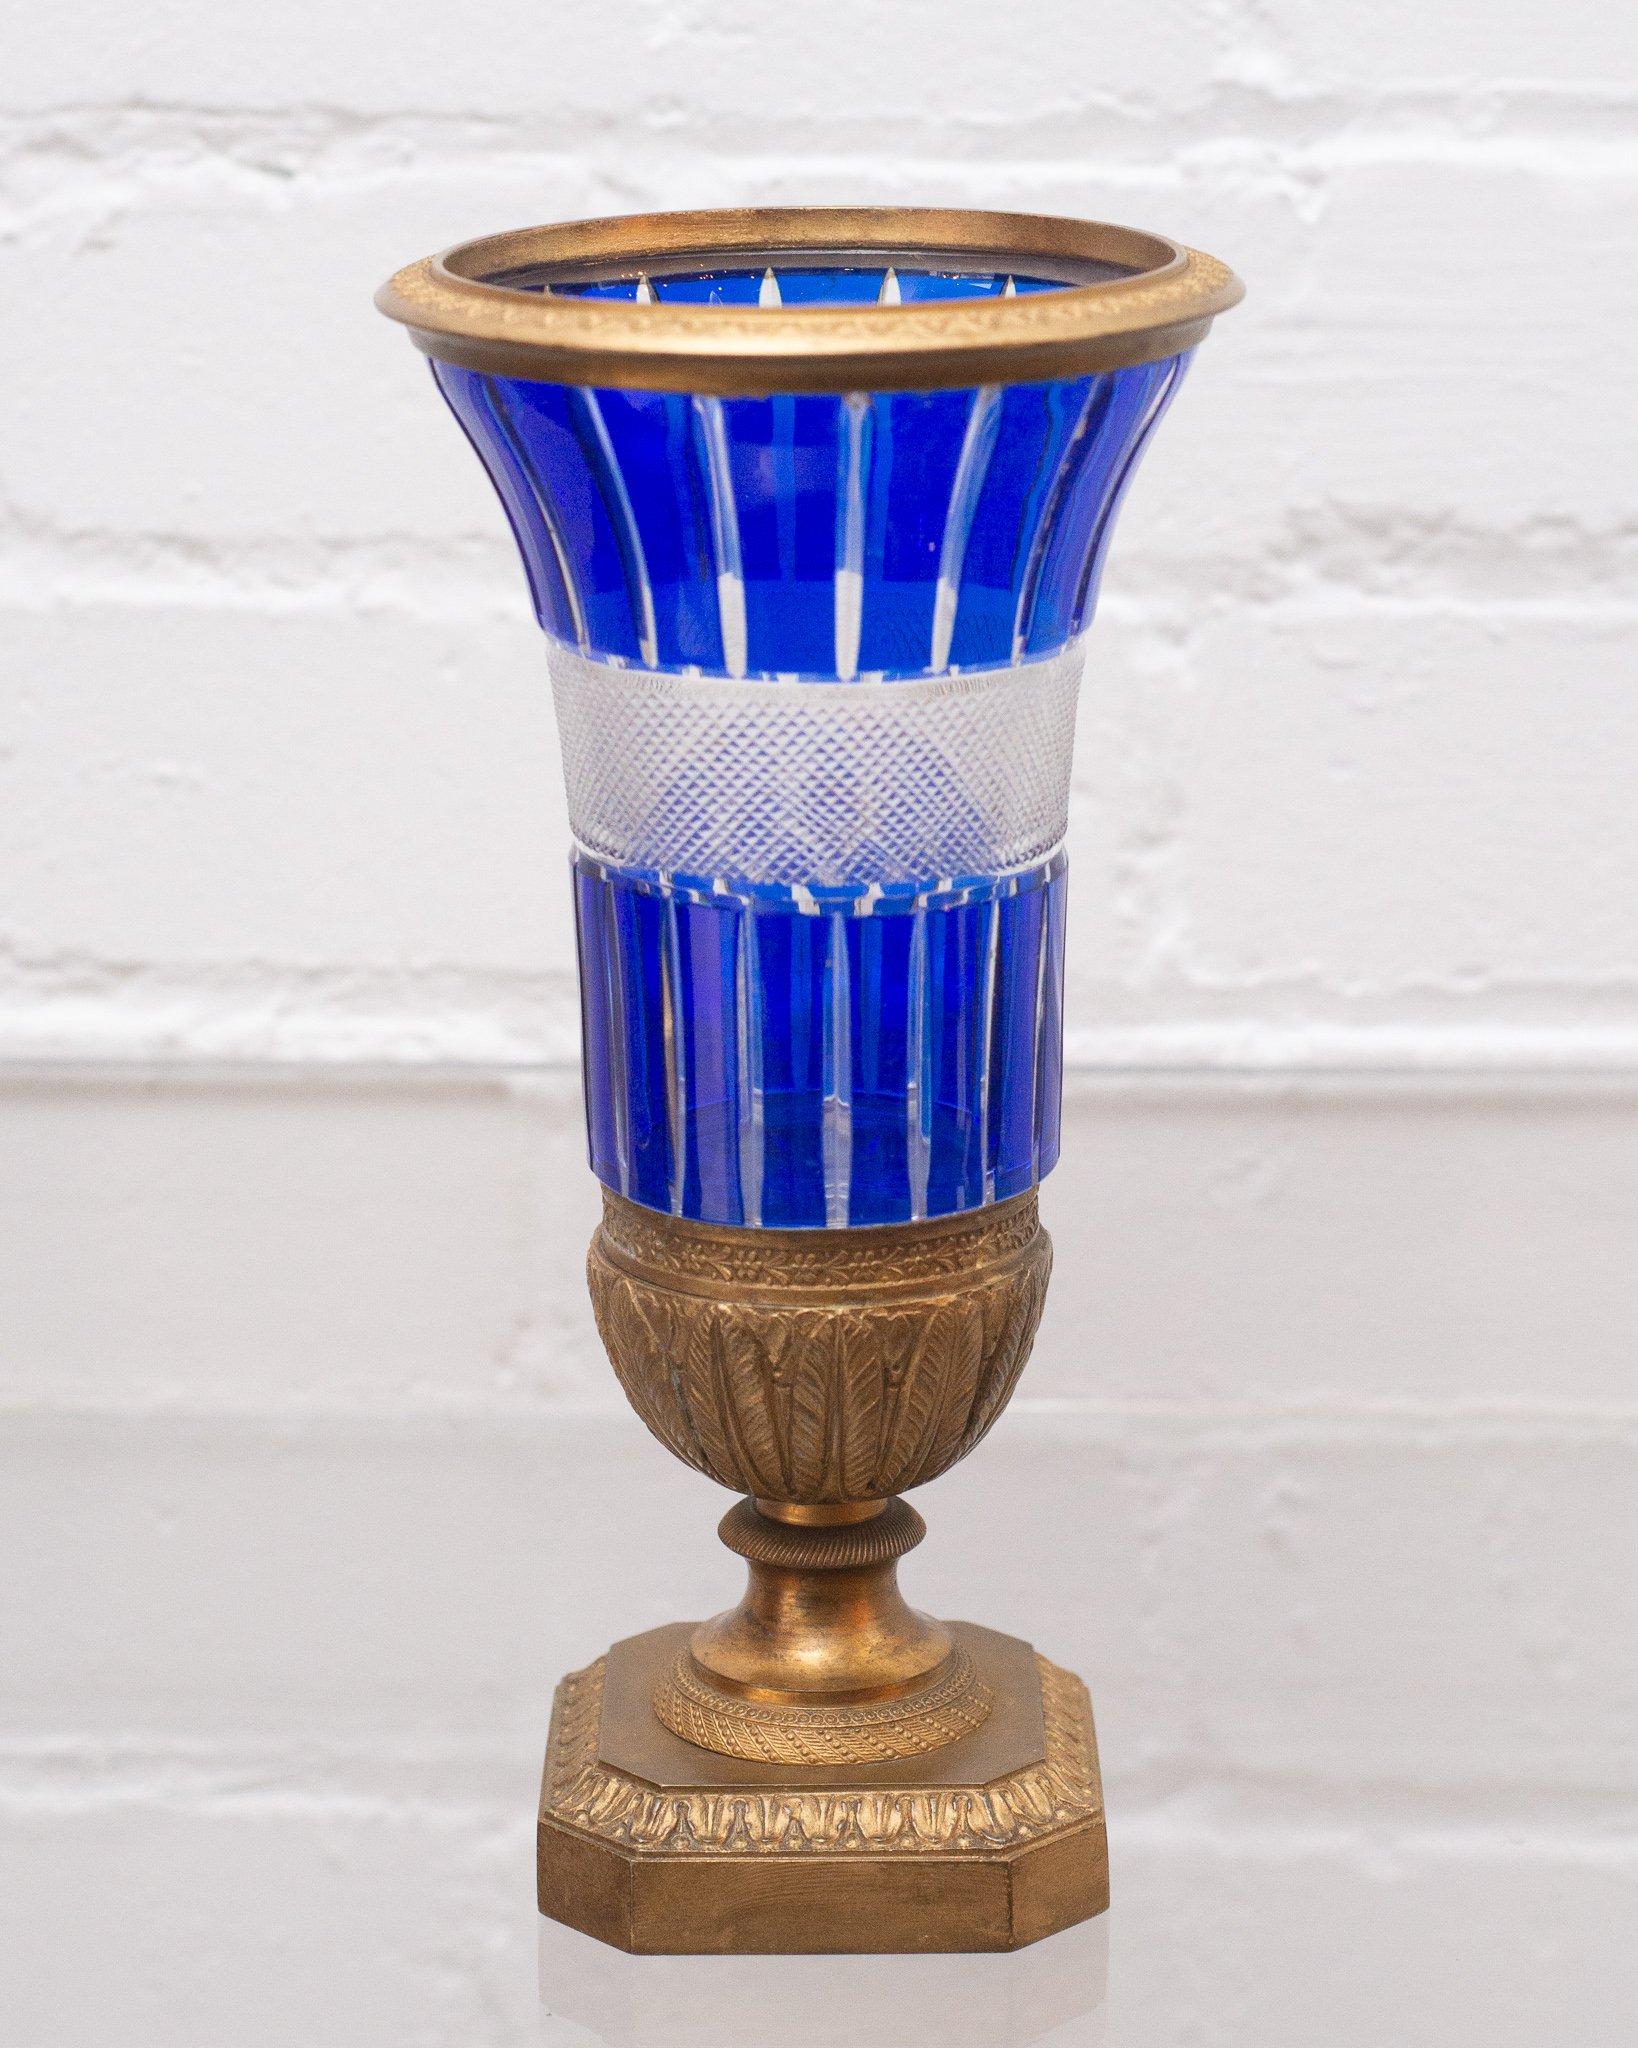 An ornate Russian Imperial cobalt blue and clear cut crystal vase, circa 1890, with bronze mount. This elaborate hand cut crystal catches the light beautifully.